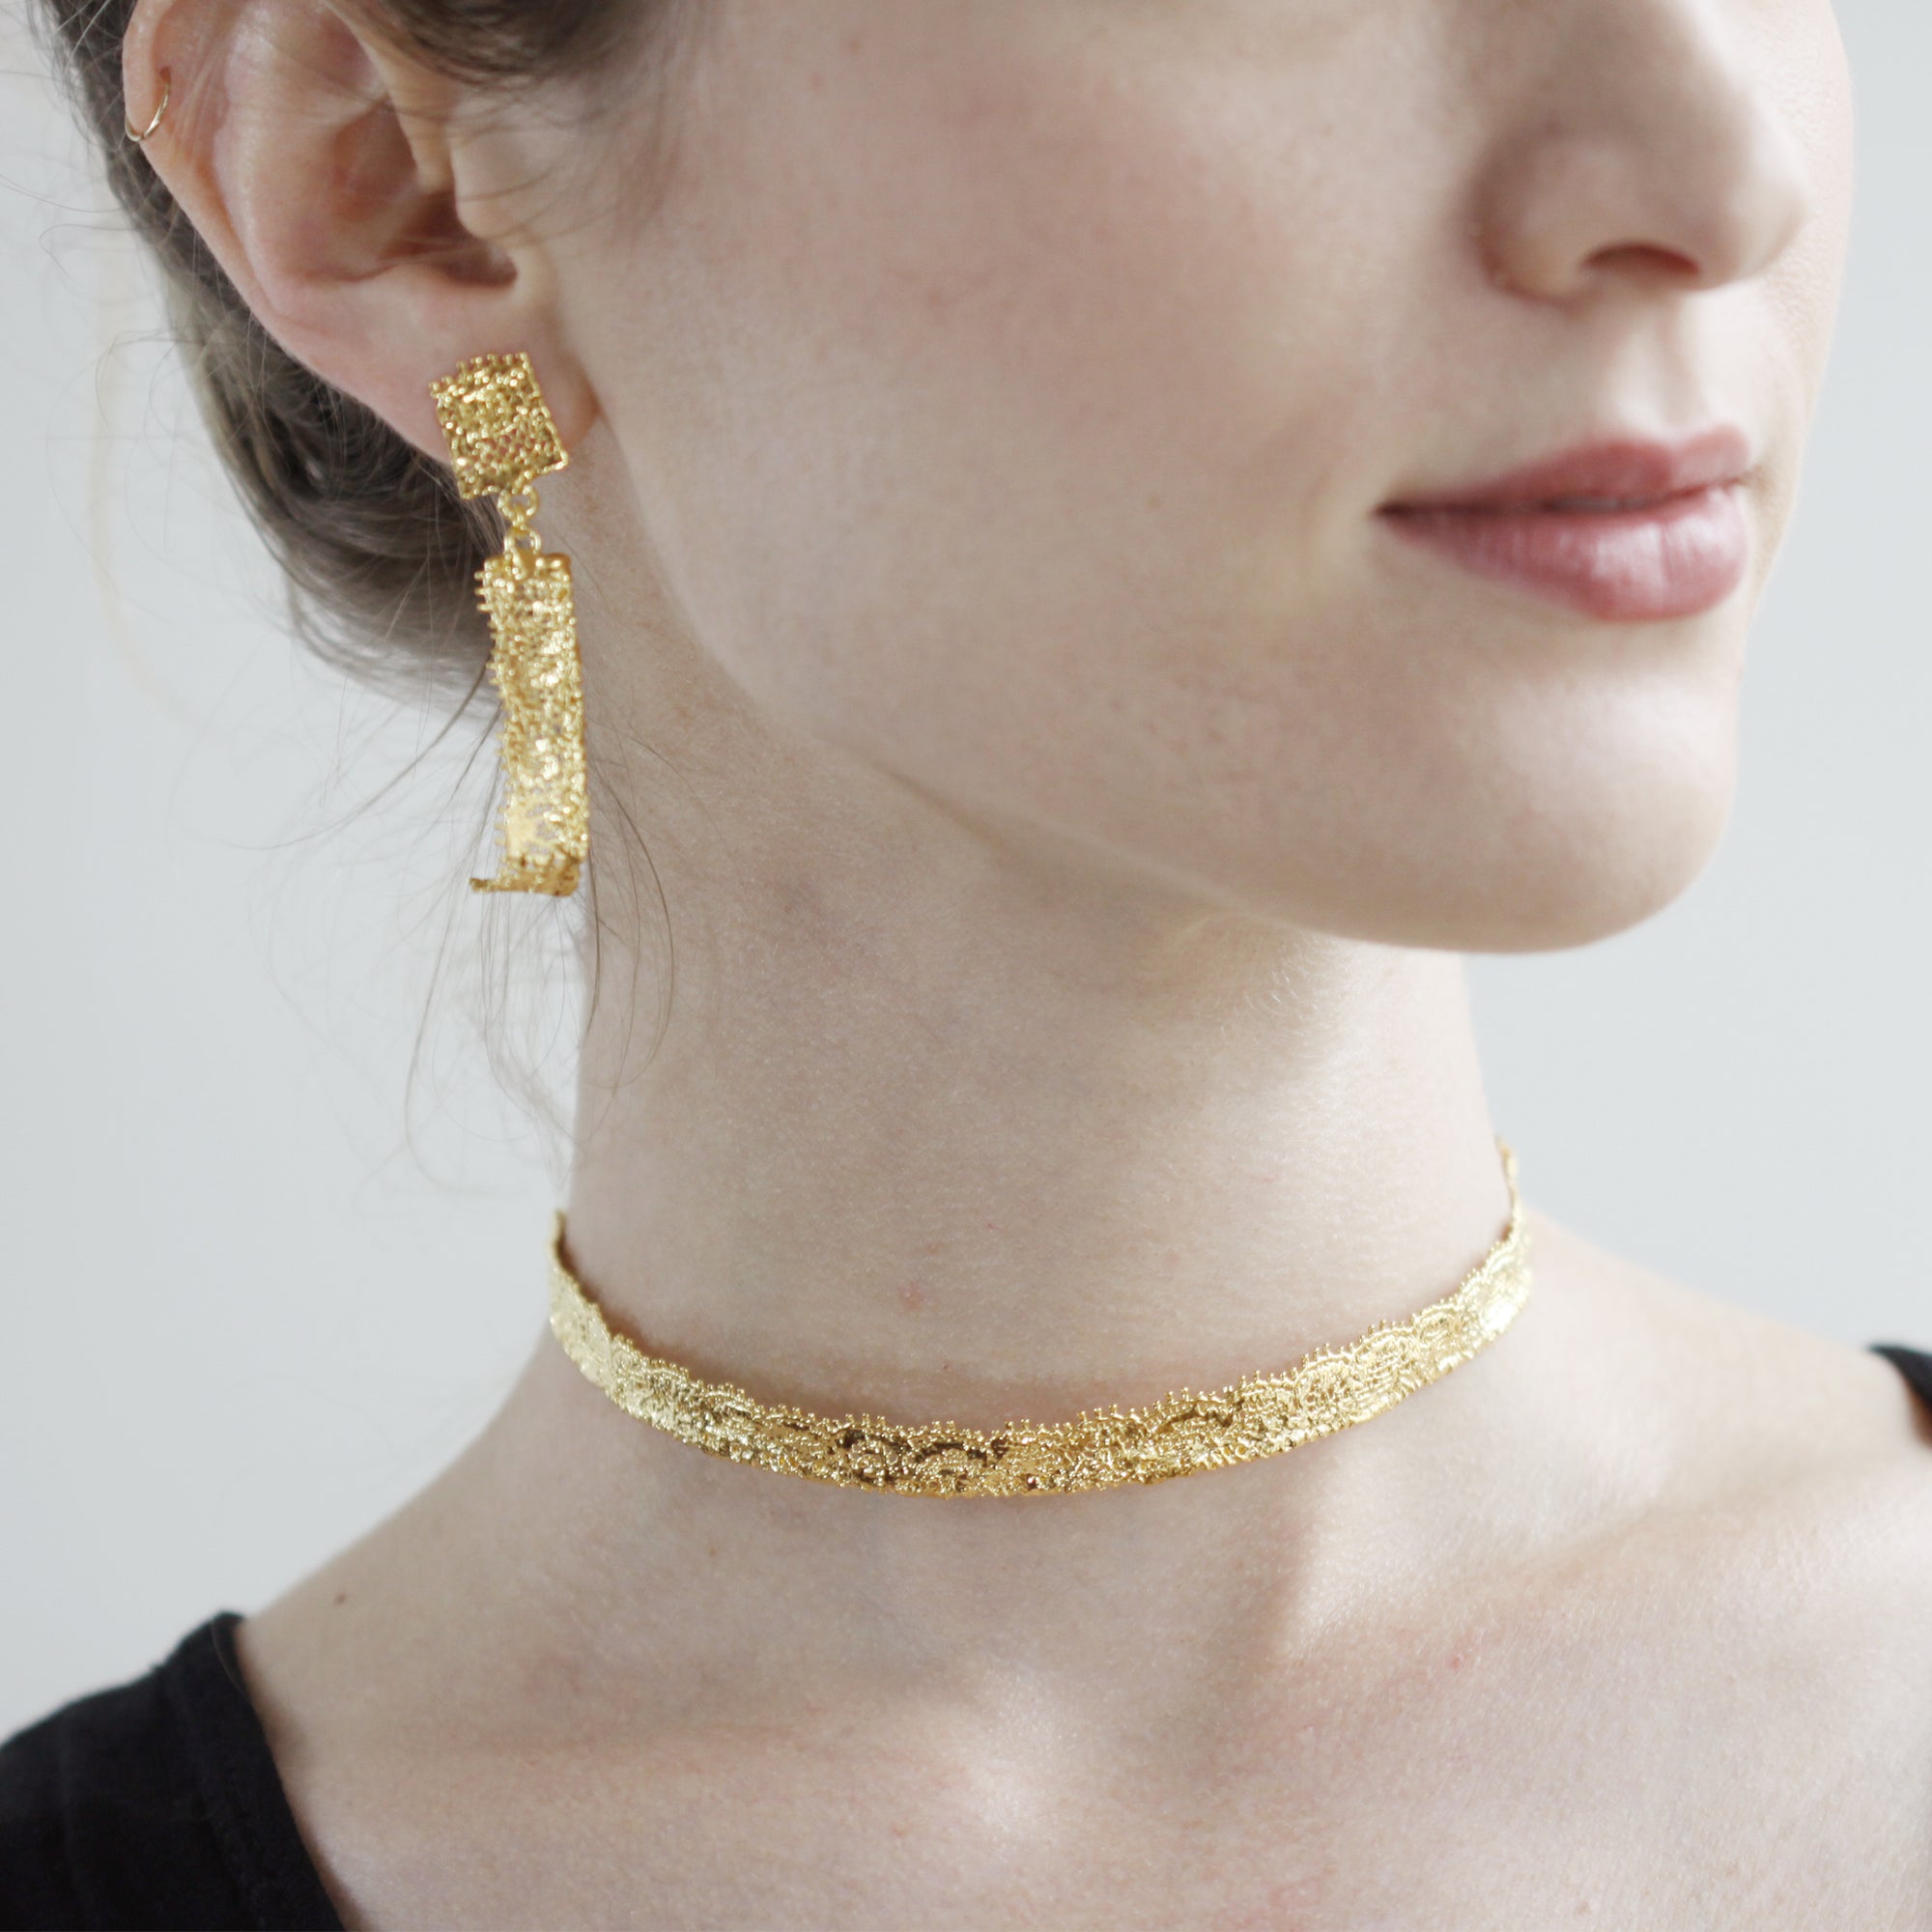 Leontine lace choker necklace in 24k gold.